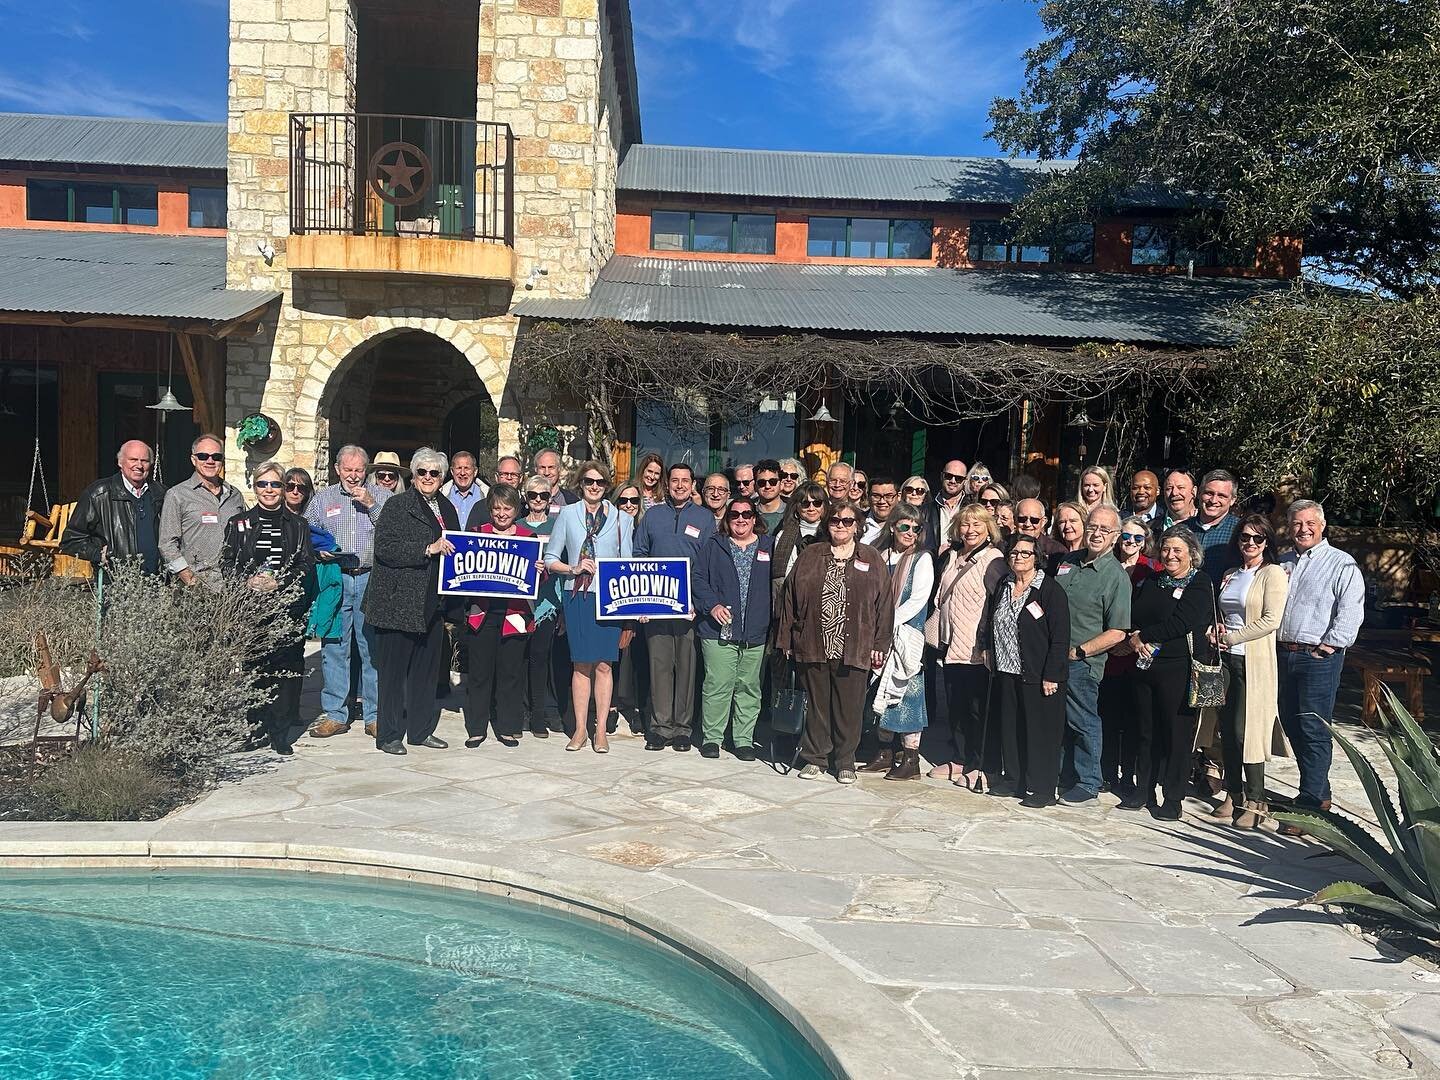 A big thank you to everyone who came out to support my fundraiser at Lake Travis yesterday! We tackled important discussions on reproductive rights, healthcare, public education, and my work on the Fair Rent Incentive Act to help create more affordab